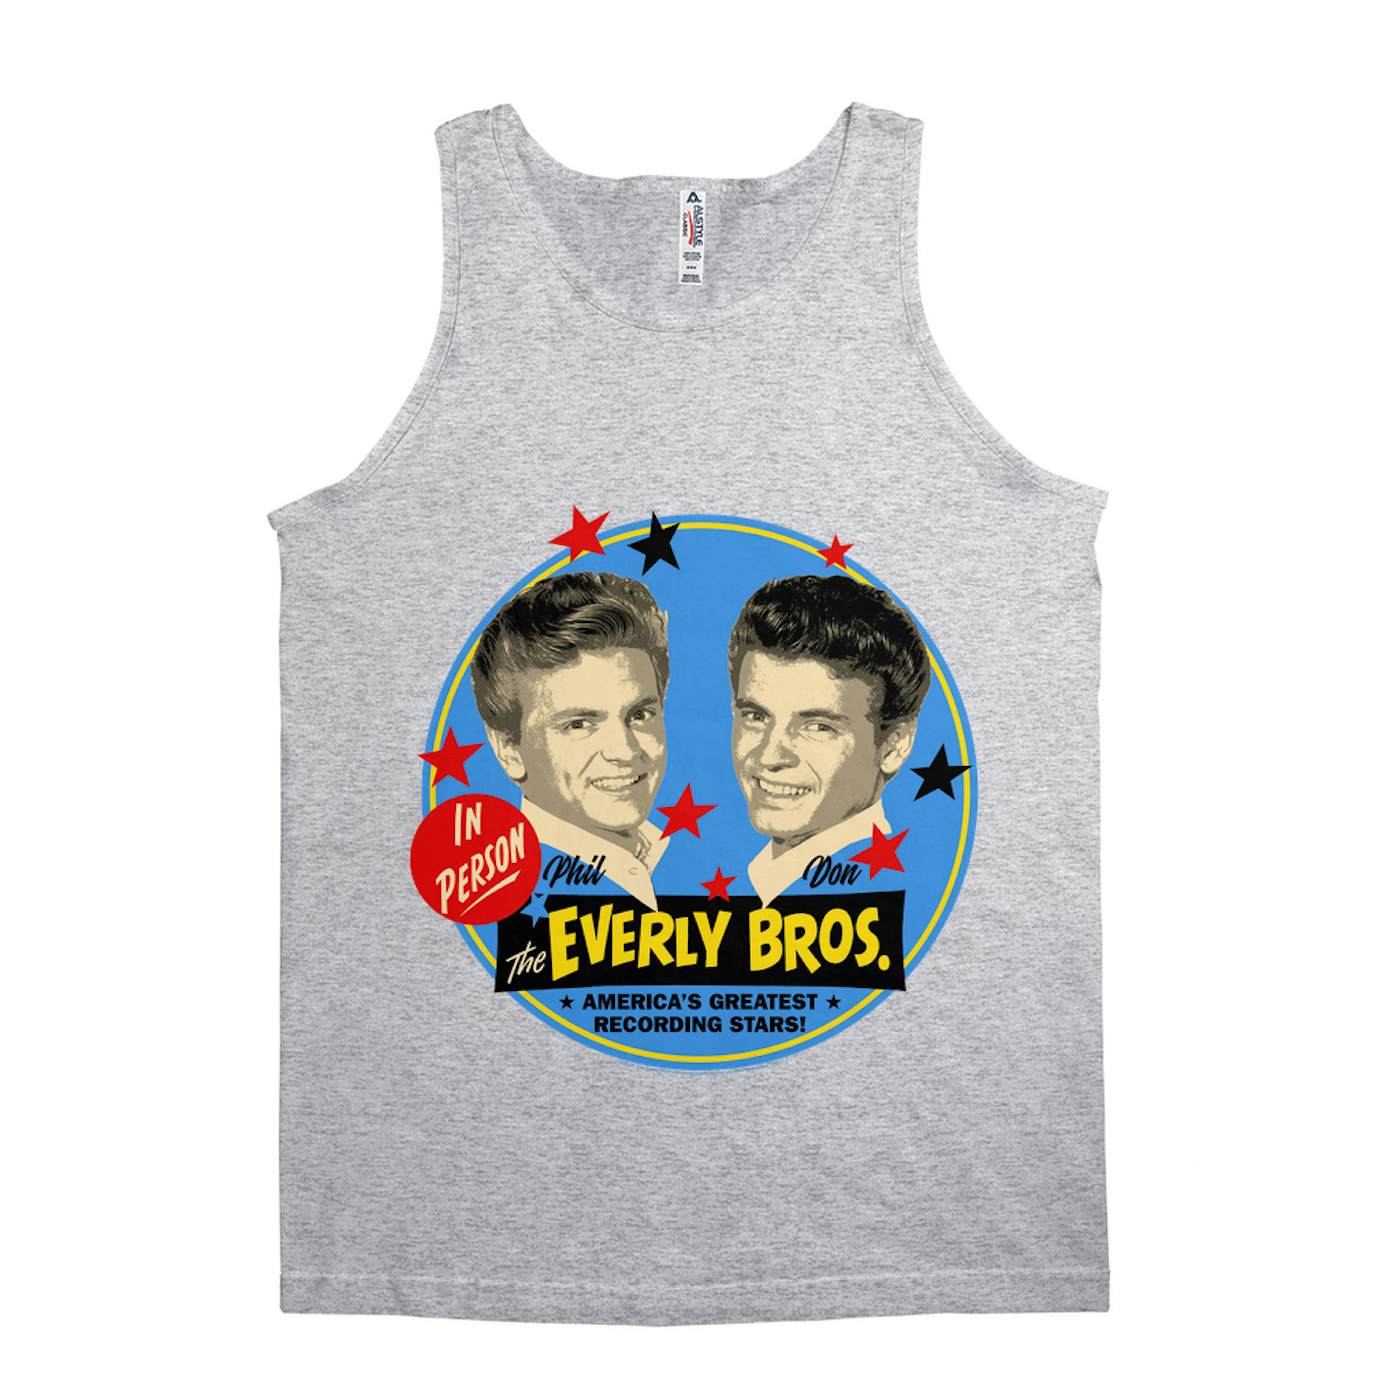 The Everly Brothers Unisex Tank Top | America's Greatest Recording Stars Promotion Image The Everly Brothers Shirt